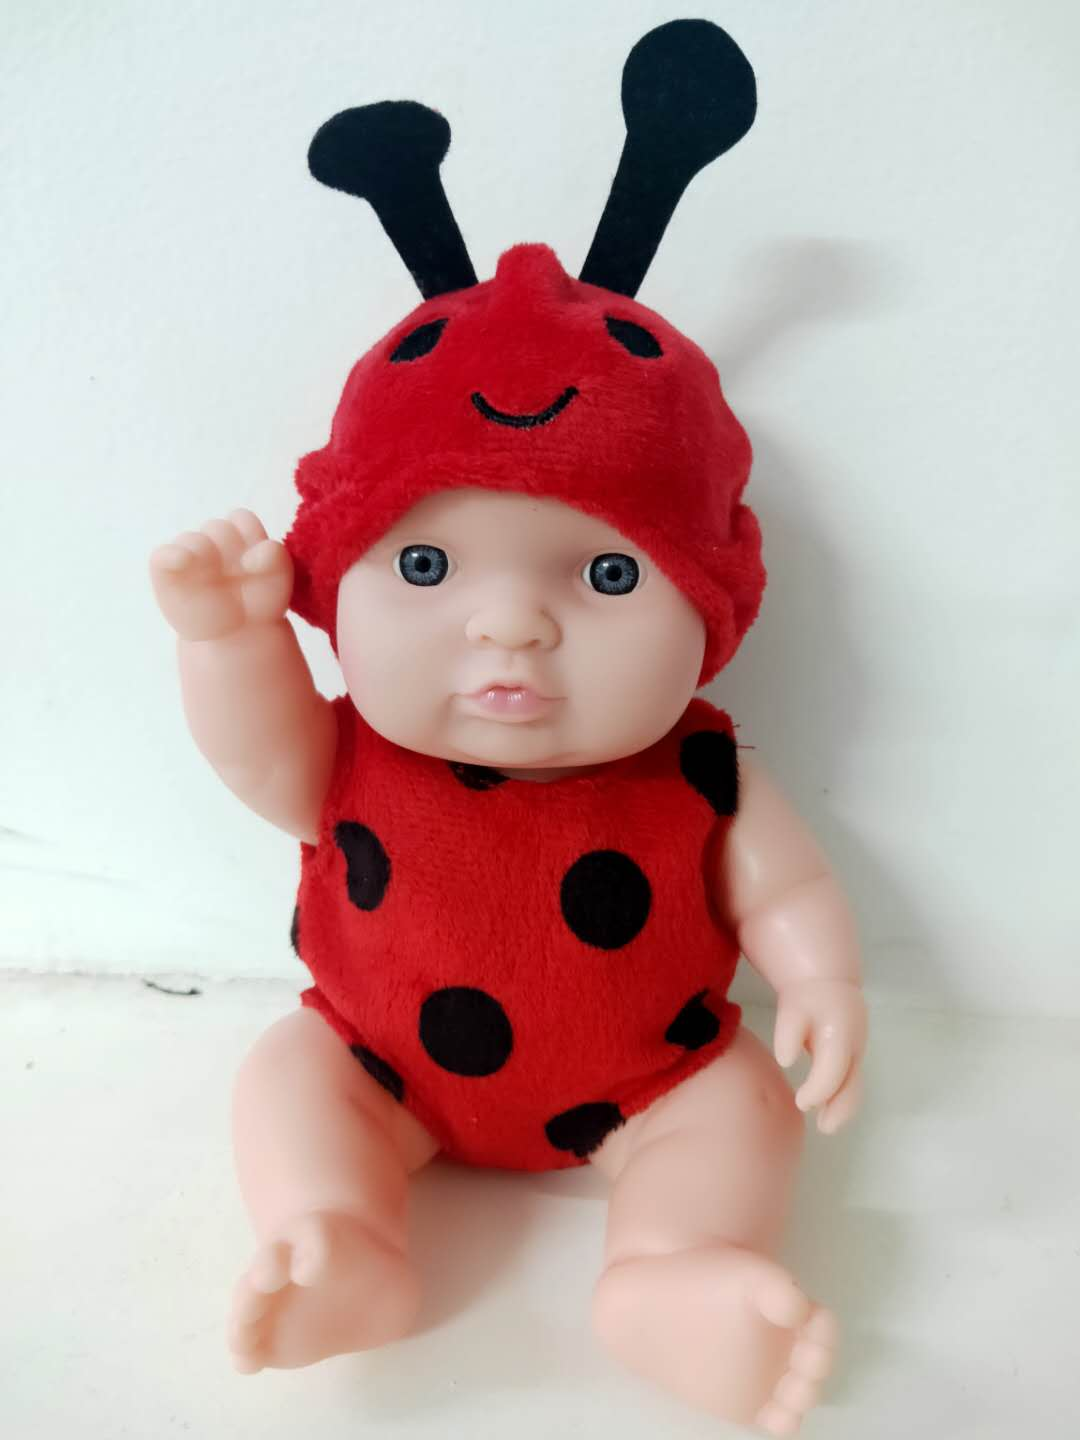 18013Cute baby doll toys for kids